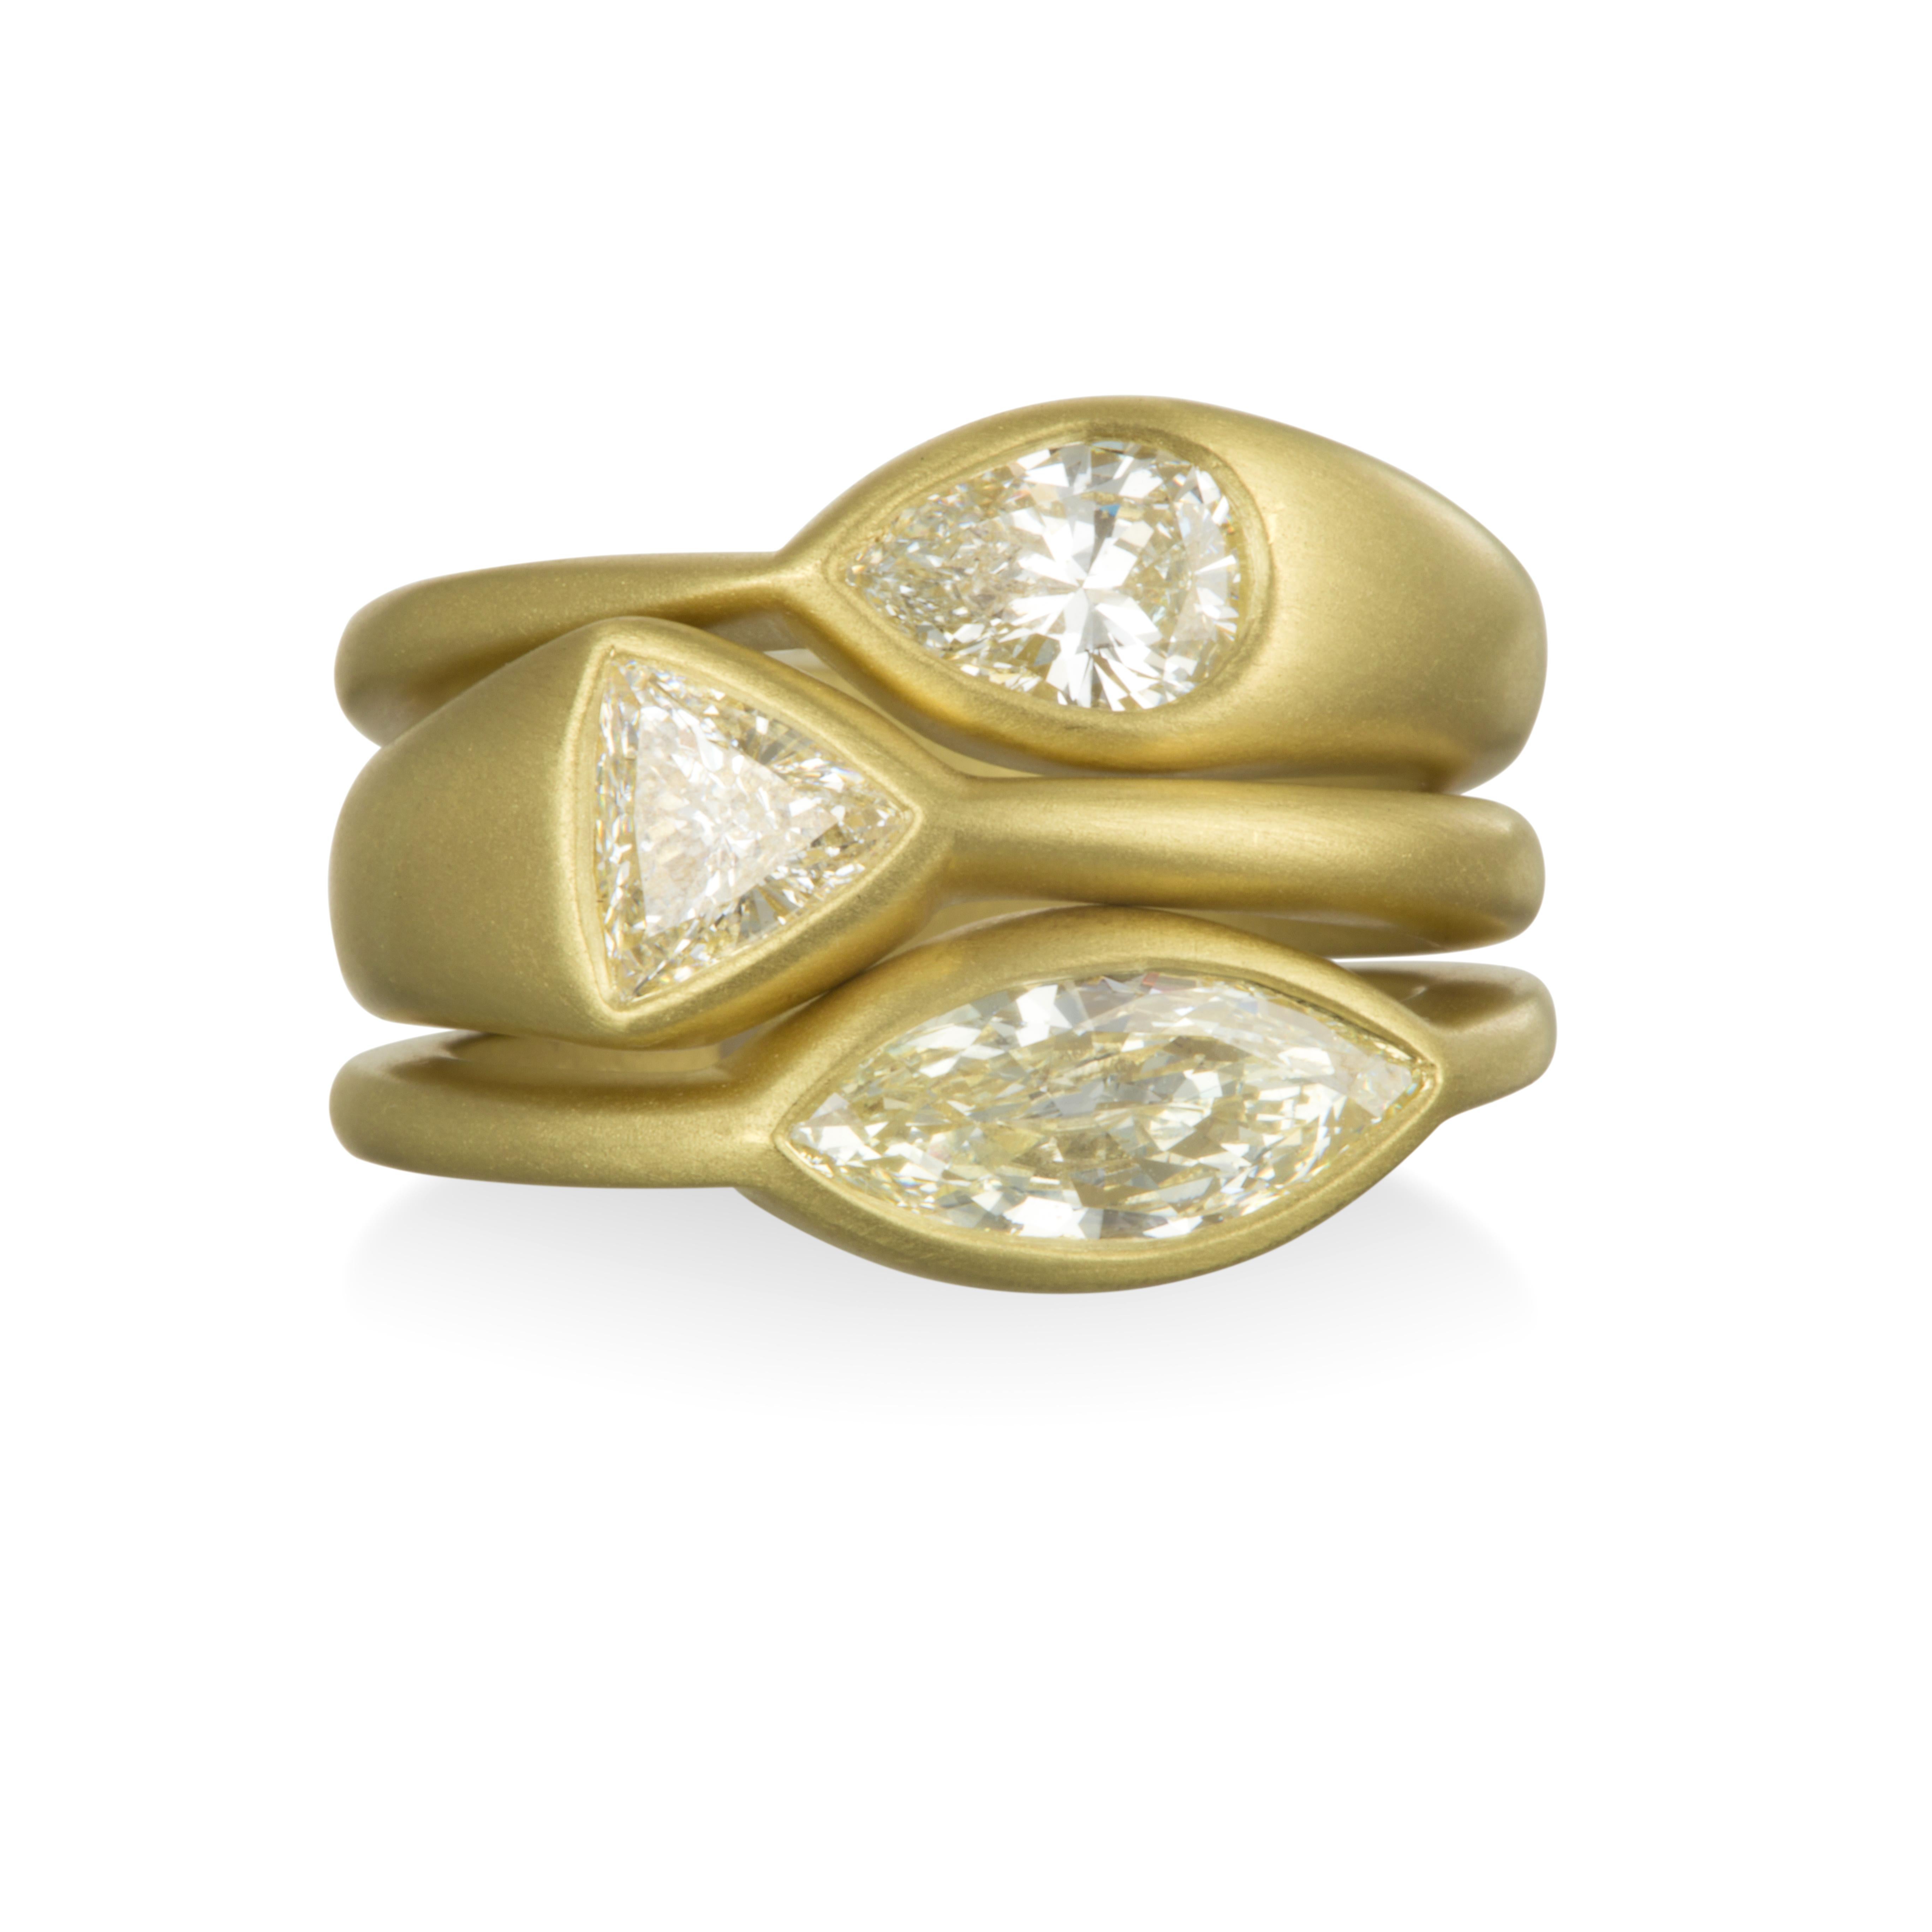 Make an impact with this exquisite modern pear-shaped diamond ring.   
Handcrafted in 18k gold with a unique bezel setting that highlights the brilliance and shape of the diamond. Wear alone or stacked, for engagement or any occasion - be different,